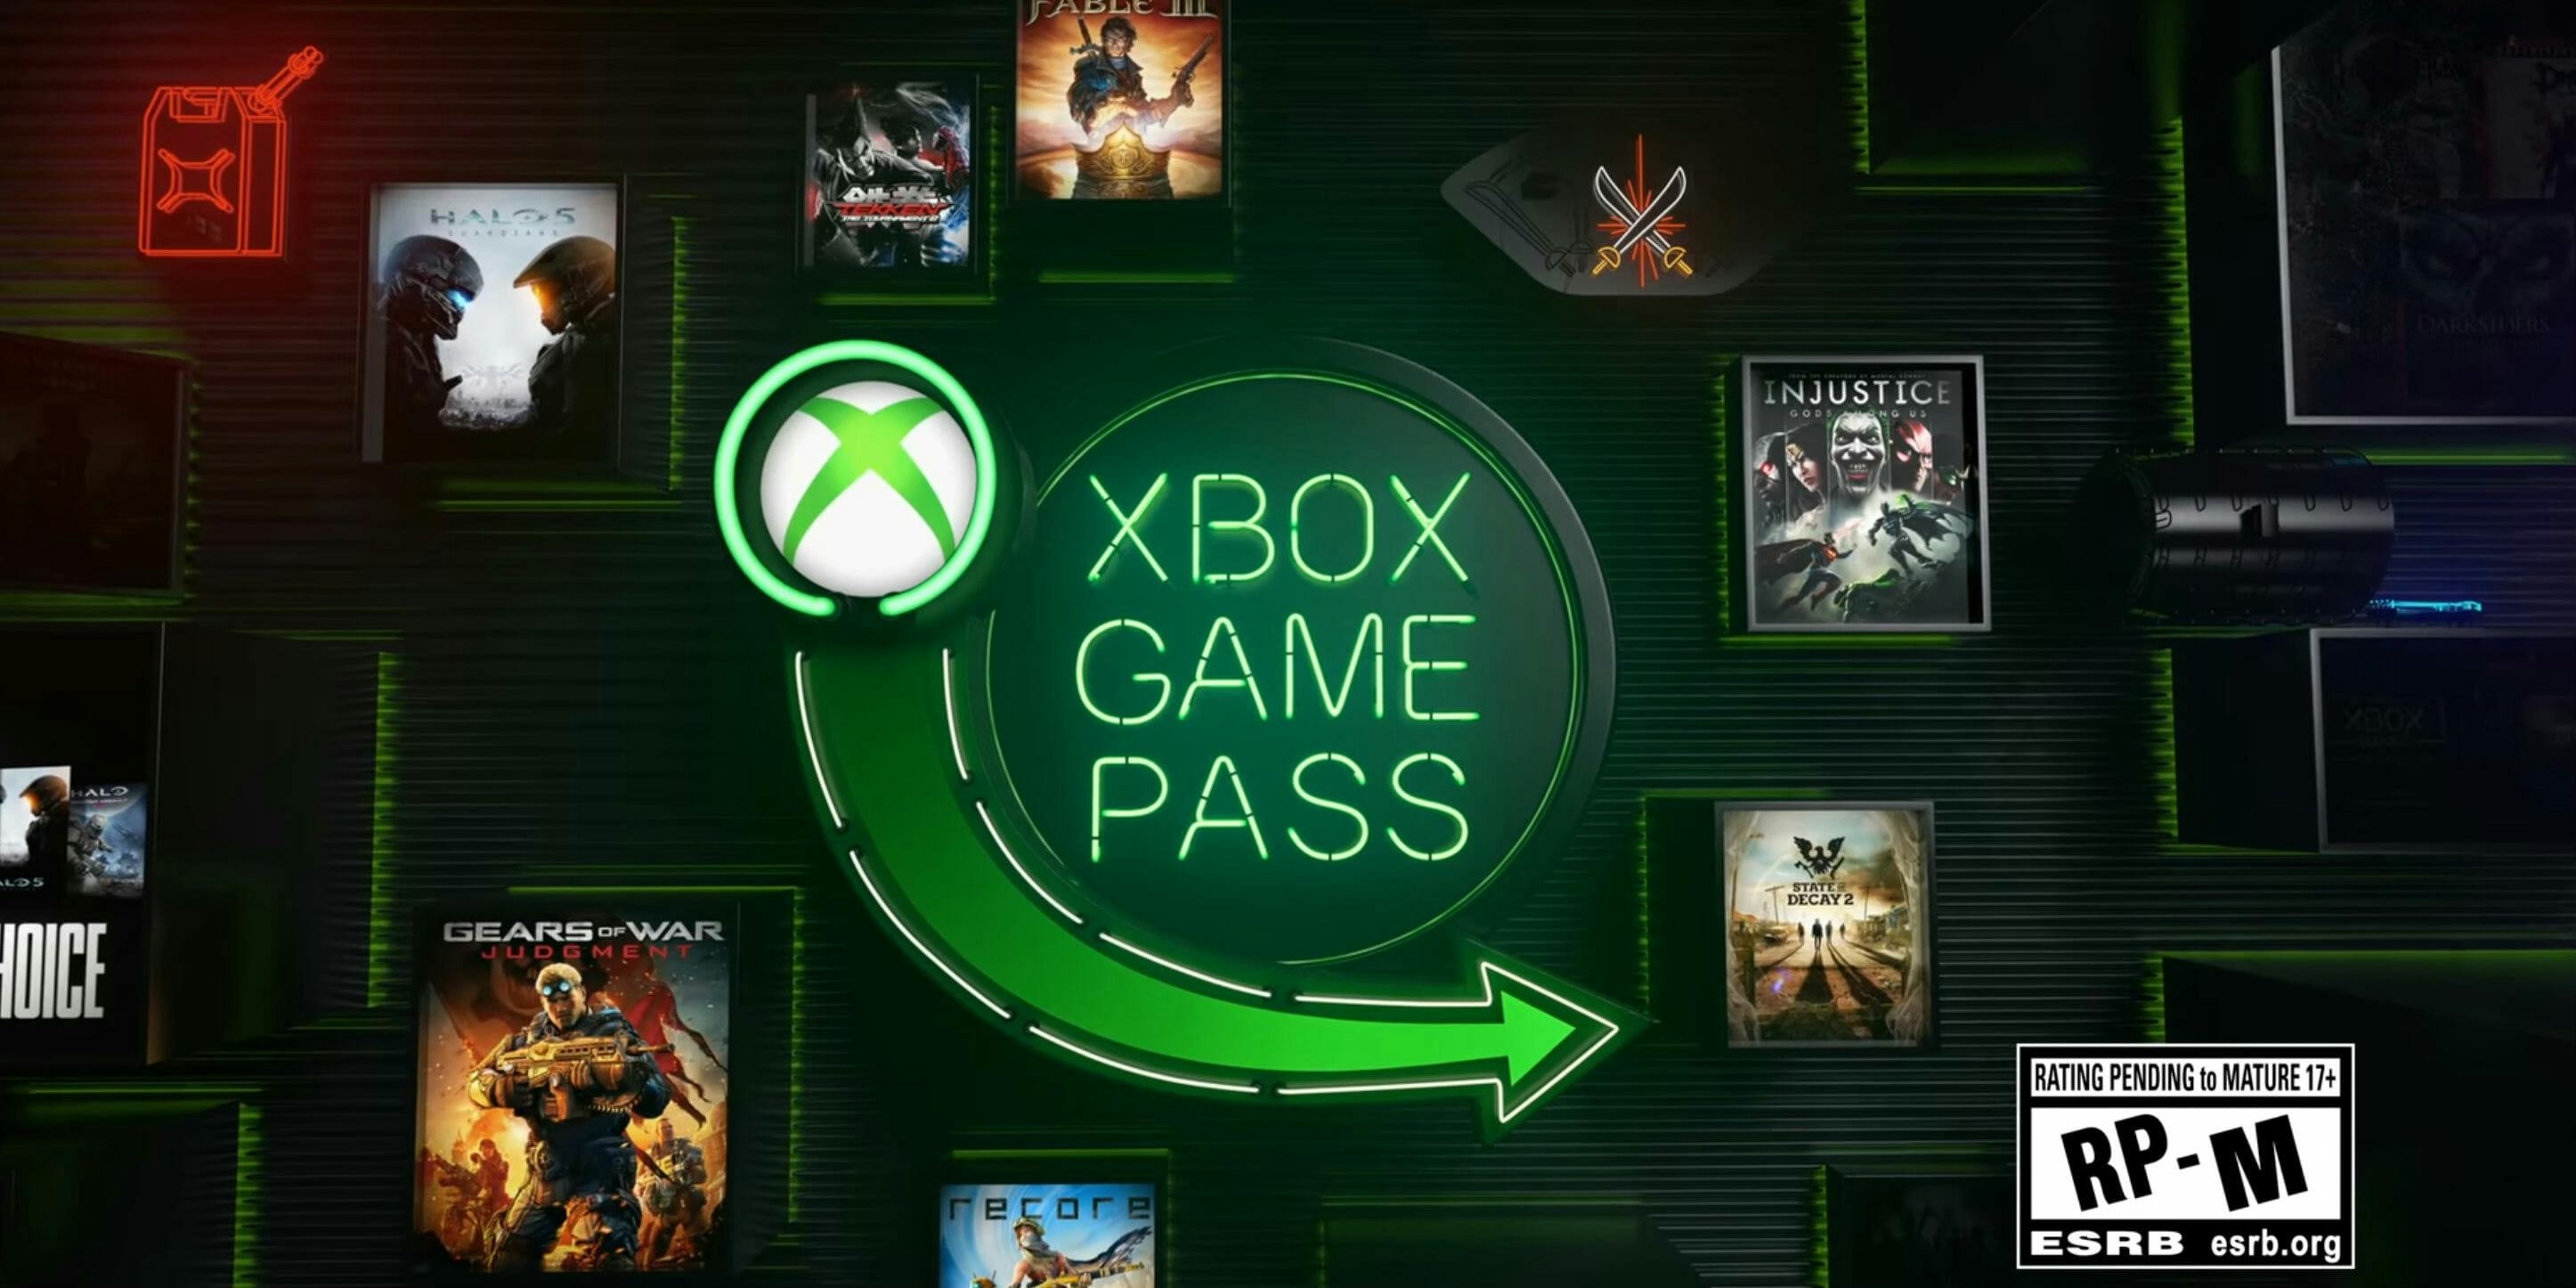 Xbox Game Pass Ultimate What Is It and How Much Does It Cost?